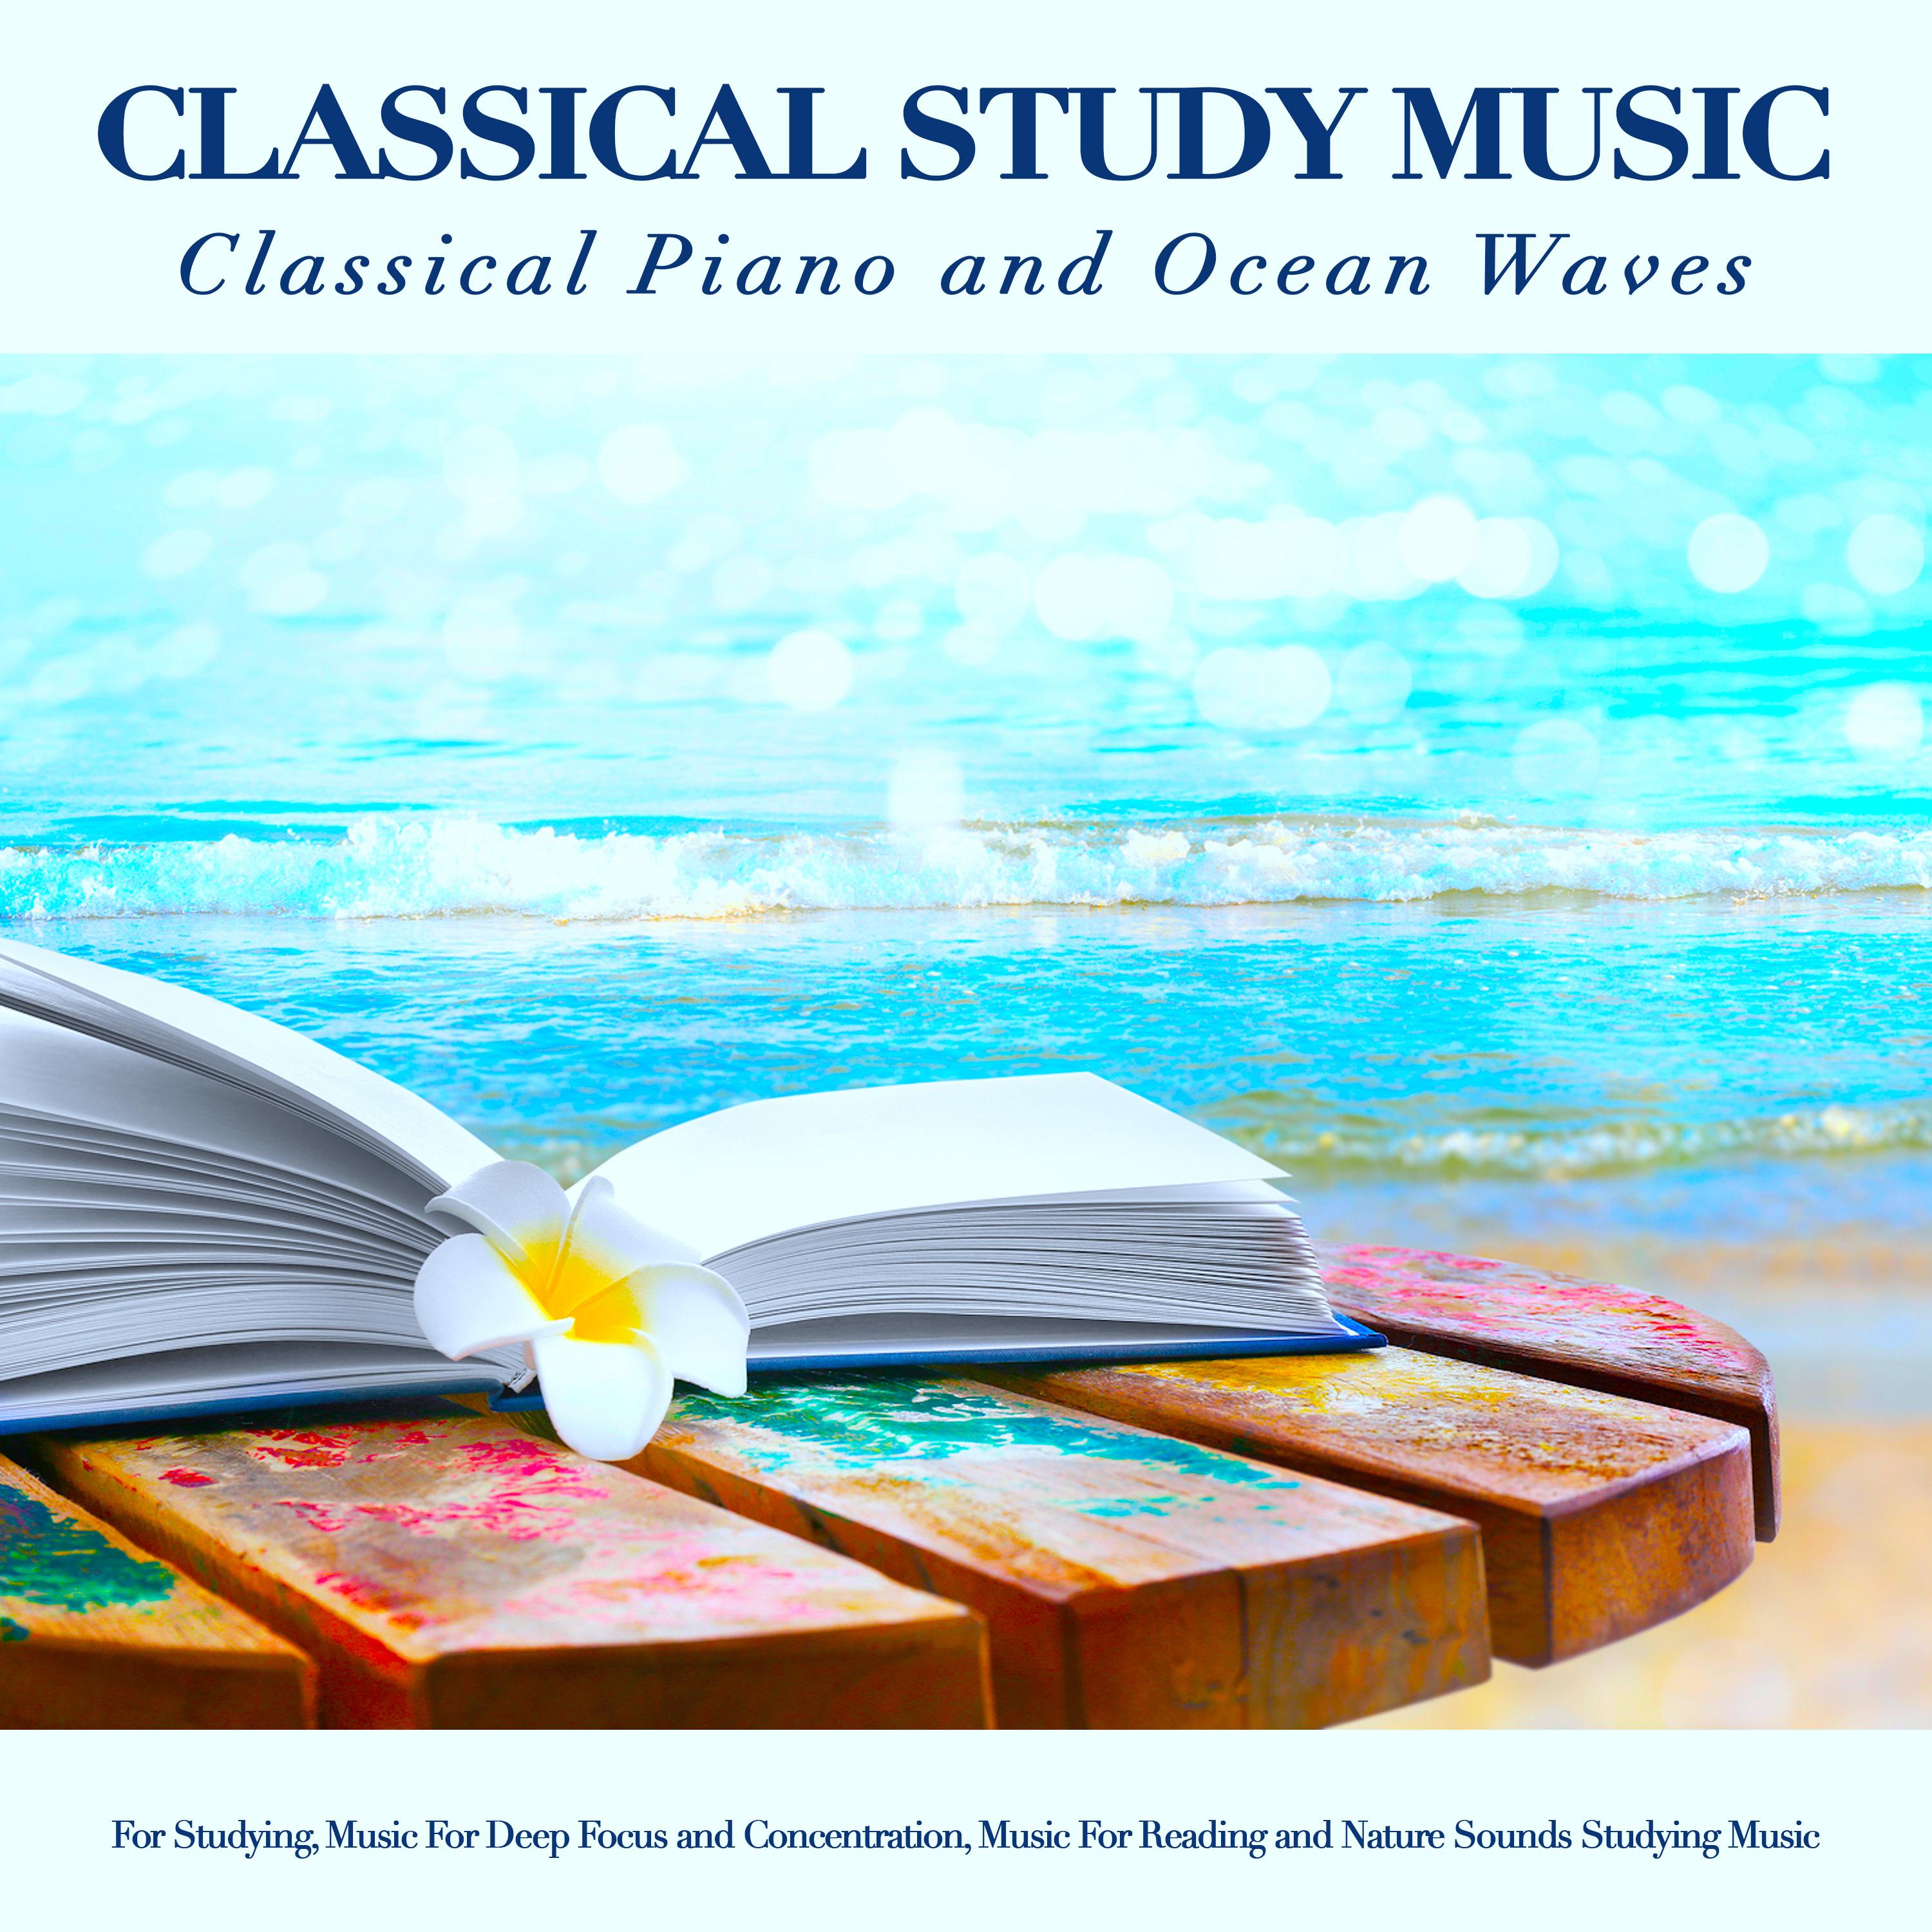 Gymnopedie No.1 - Satie - Classical Study Music - Ocean Waves Sounds - Classical Piano for Studying